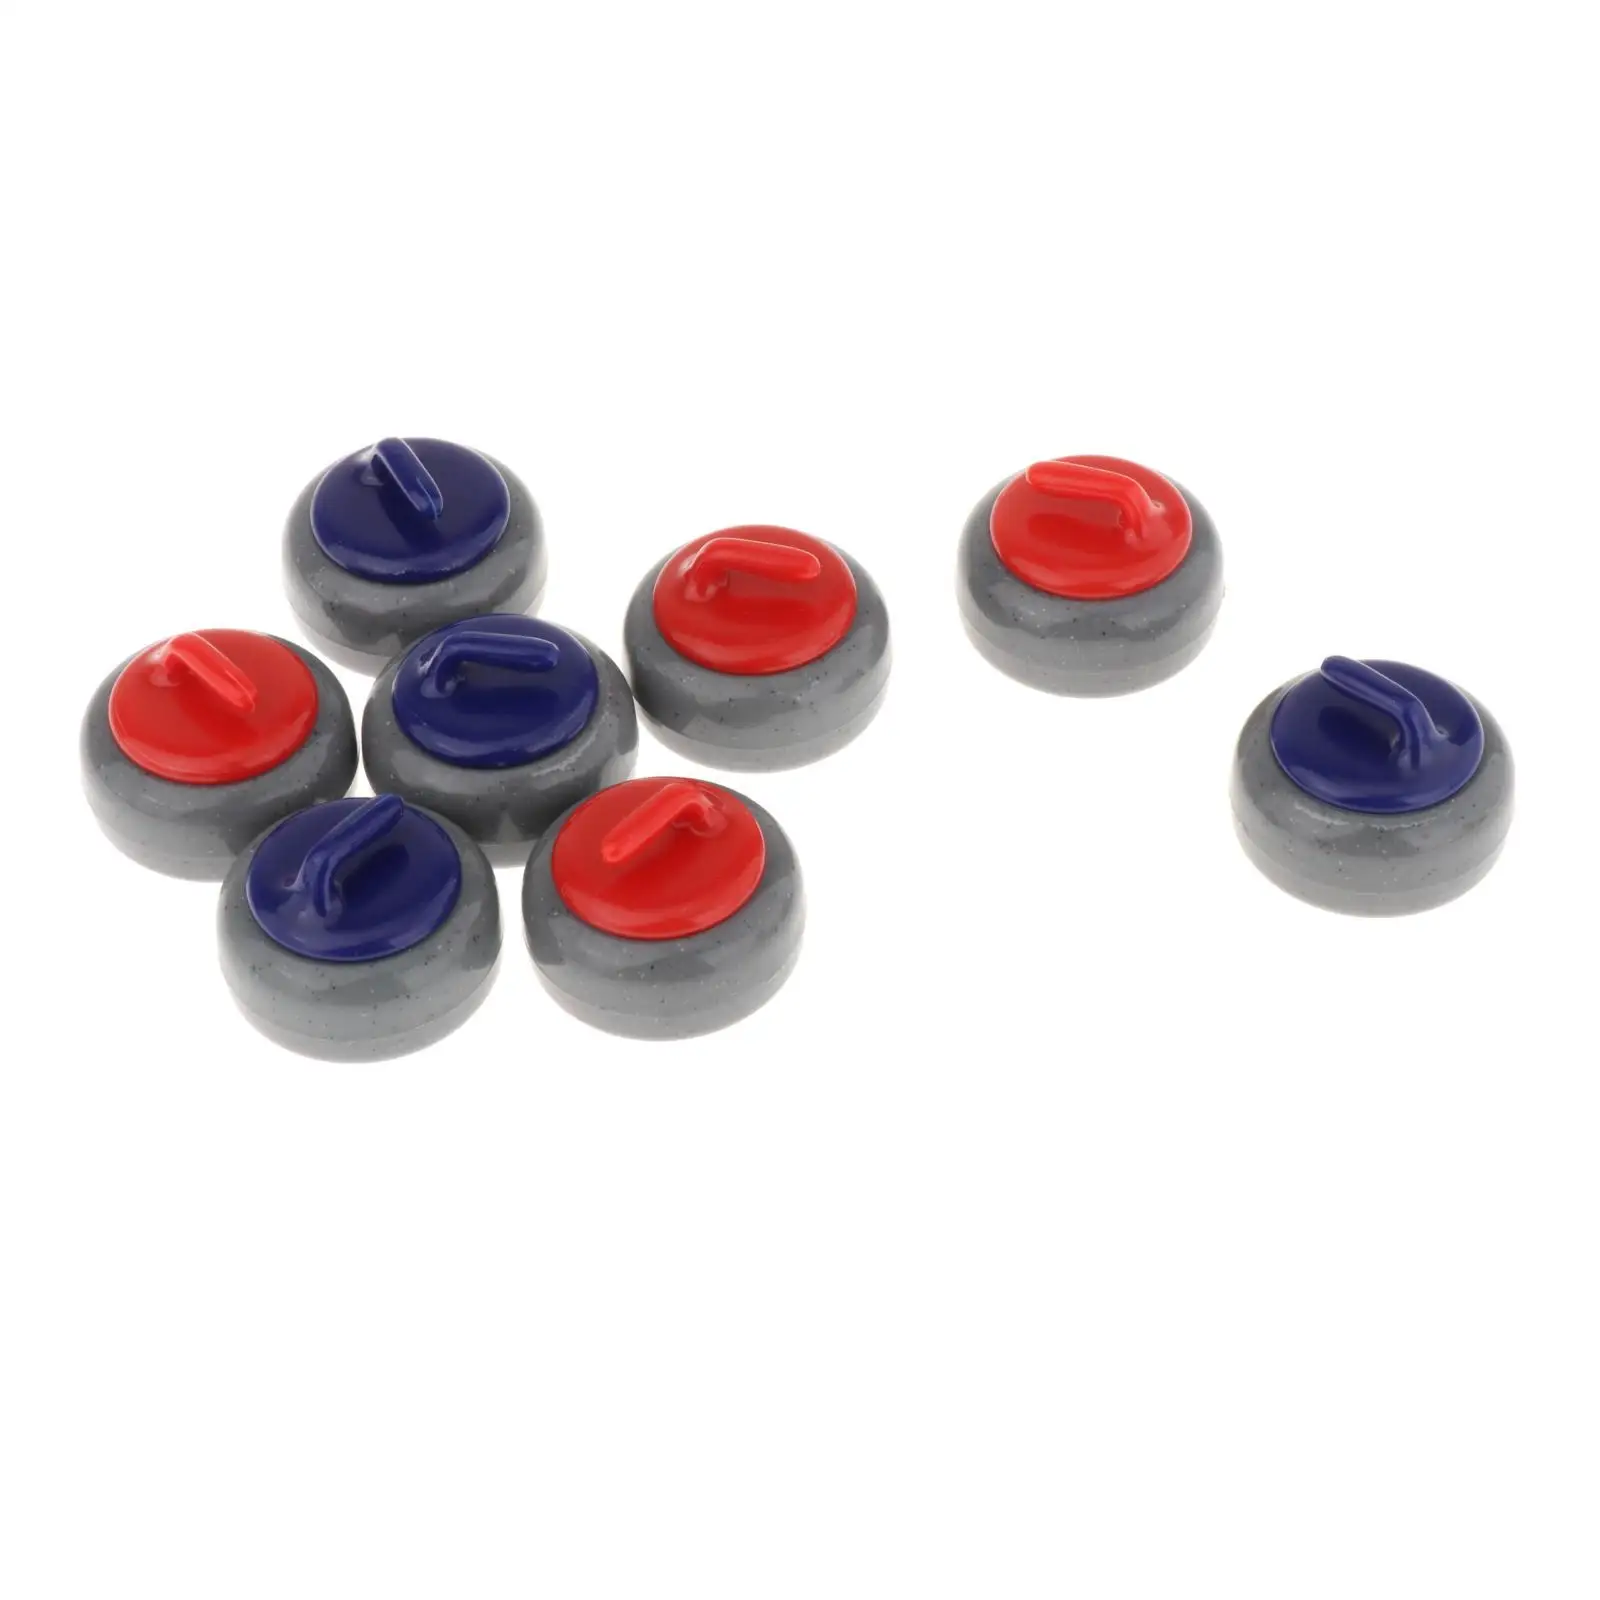 8 Pieces Tabletop Curling Game Pucks Family Traveling Sports Toy Children Game Educational Toy Shuffleboard Rollers